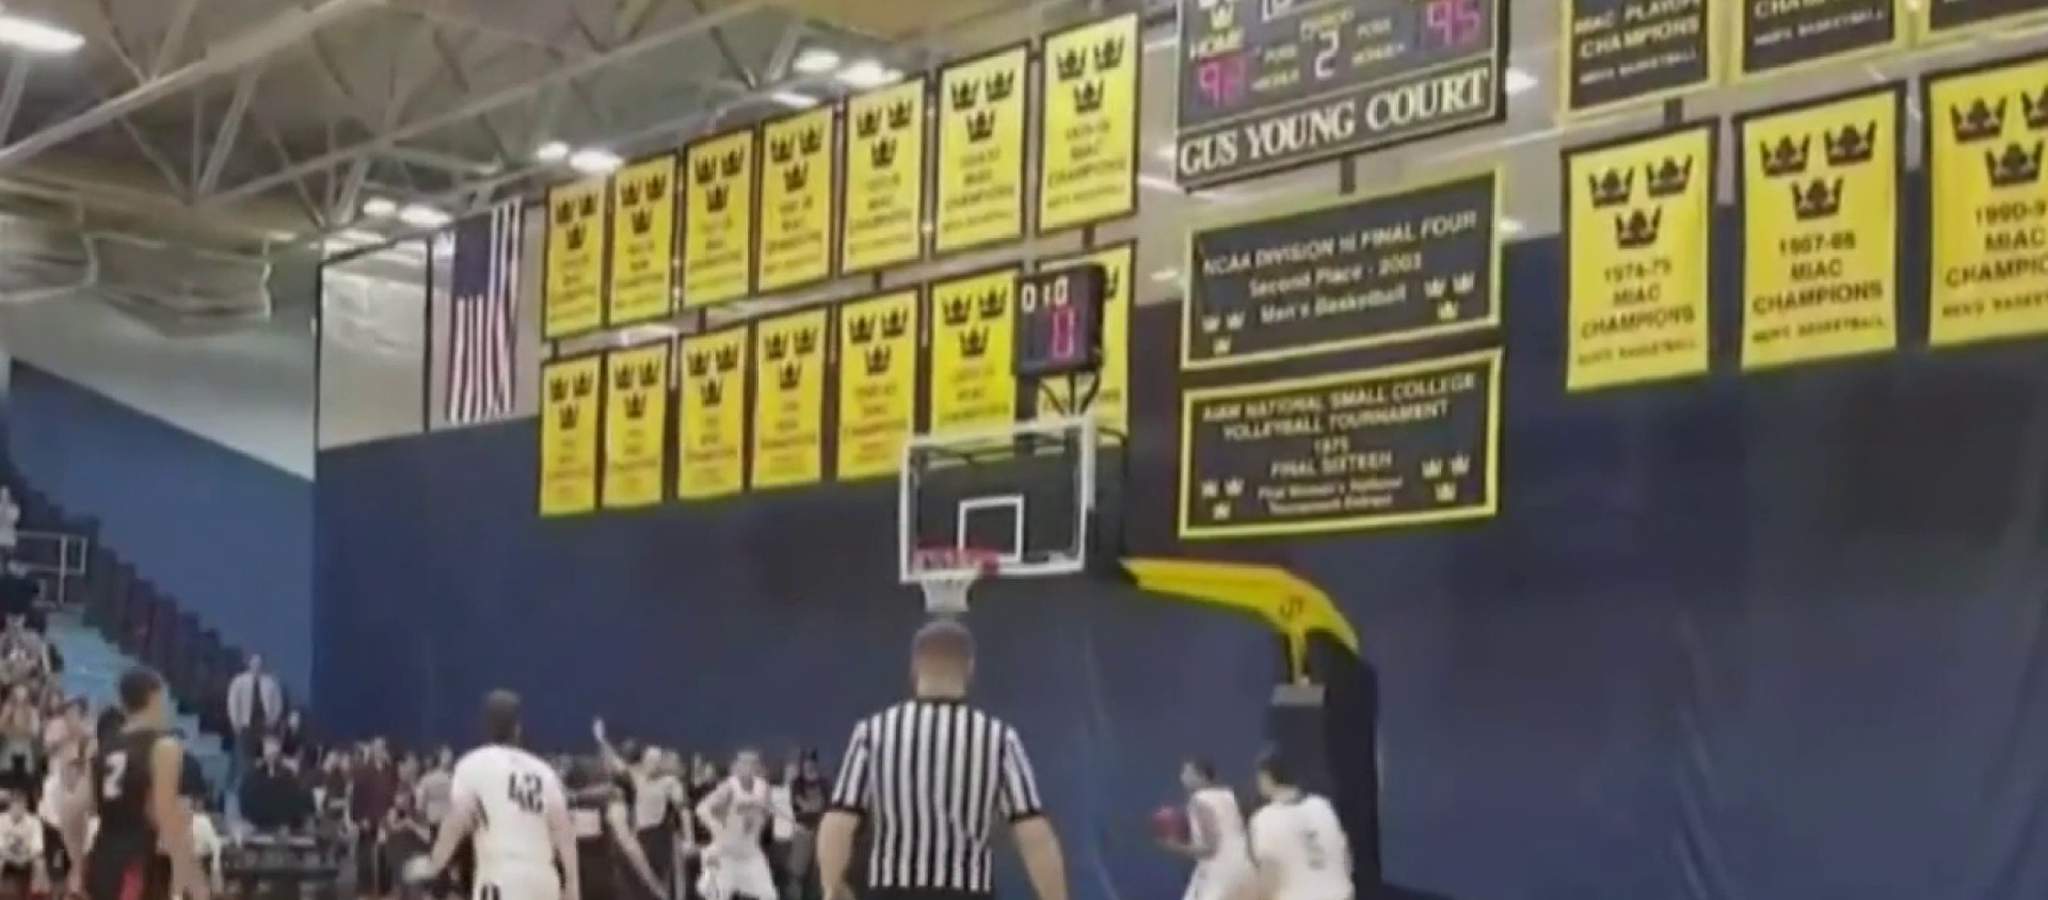 New mandate calls for increased COVID testing of Michigan student athletes